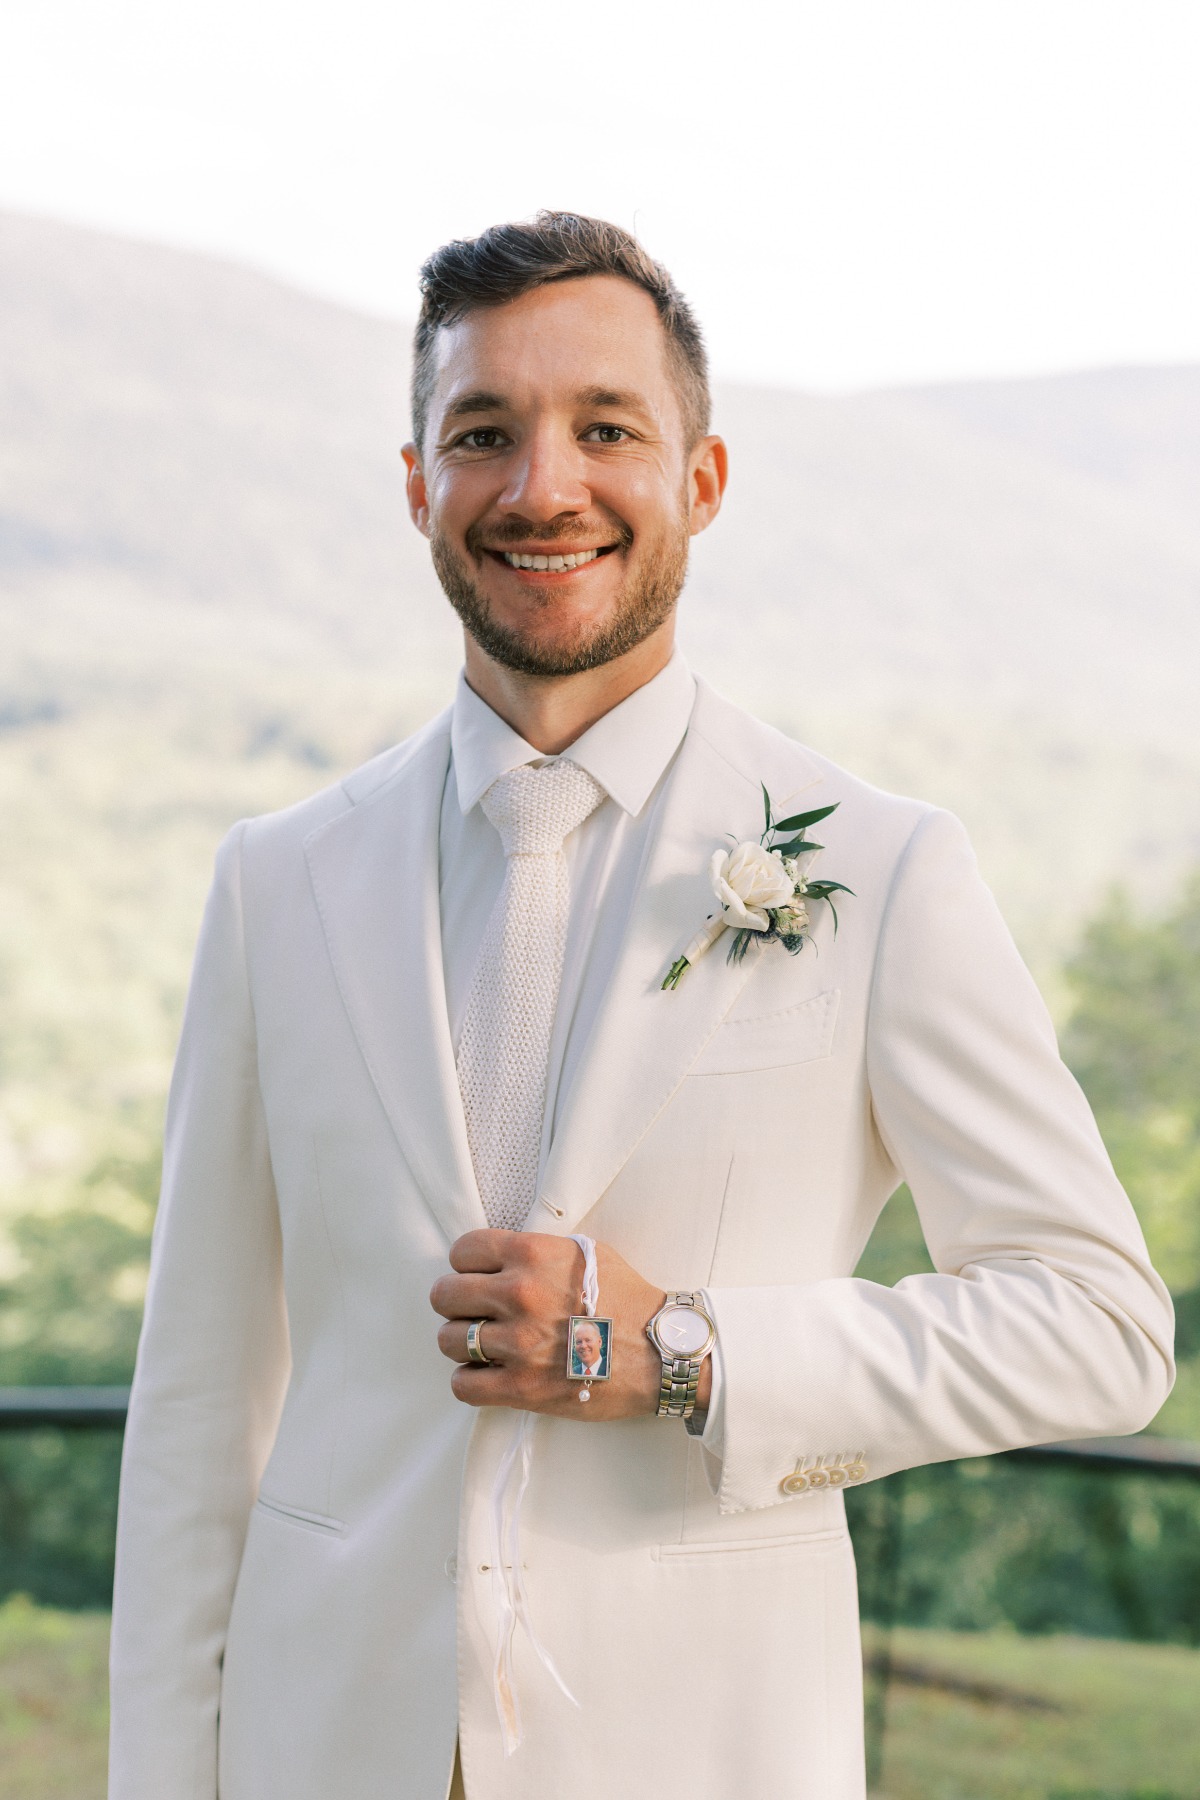 Groom in off-white suit from Suit Supply carrying locket 